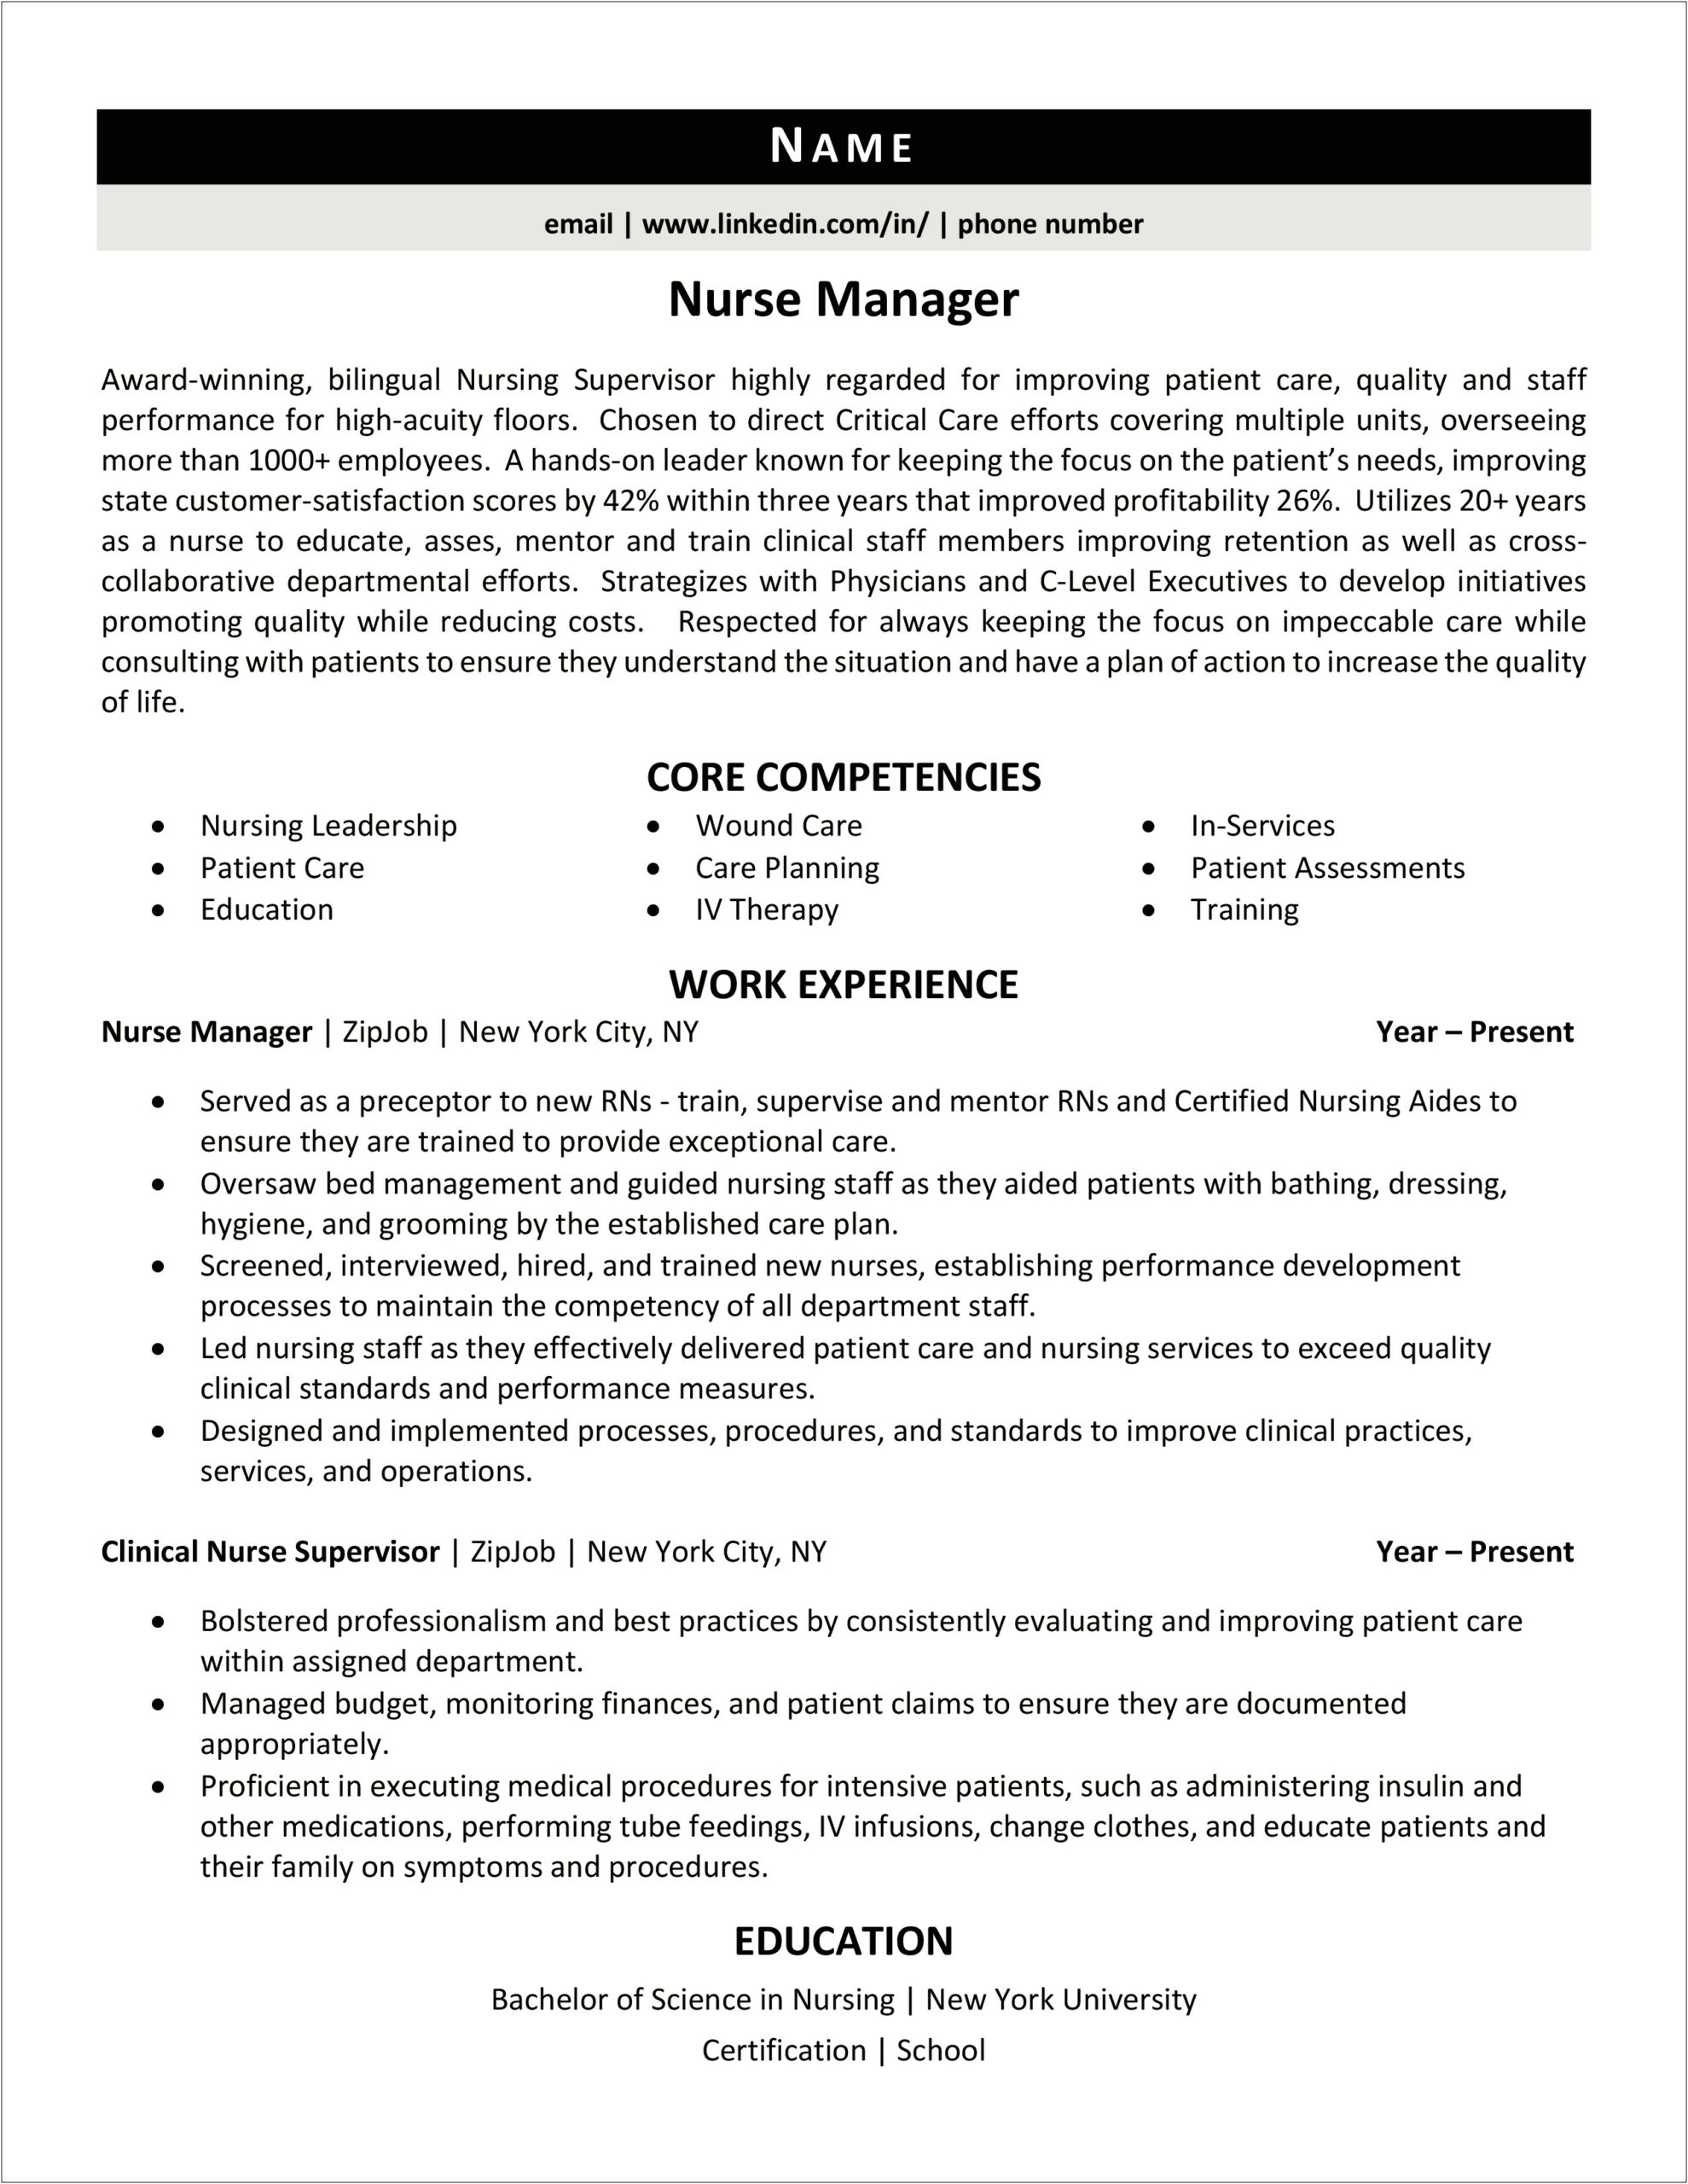 Nursing Qualifications And Skills For Resume